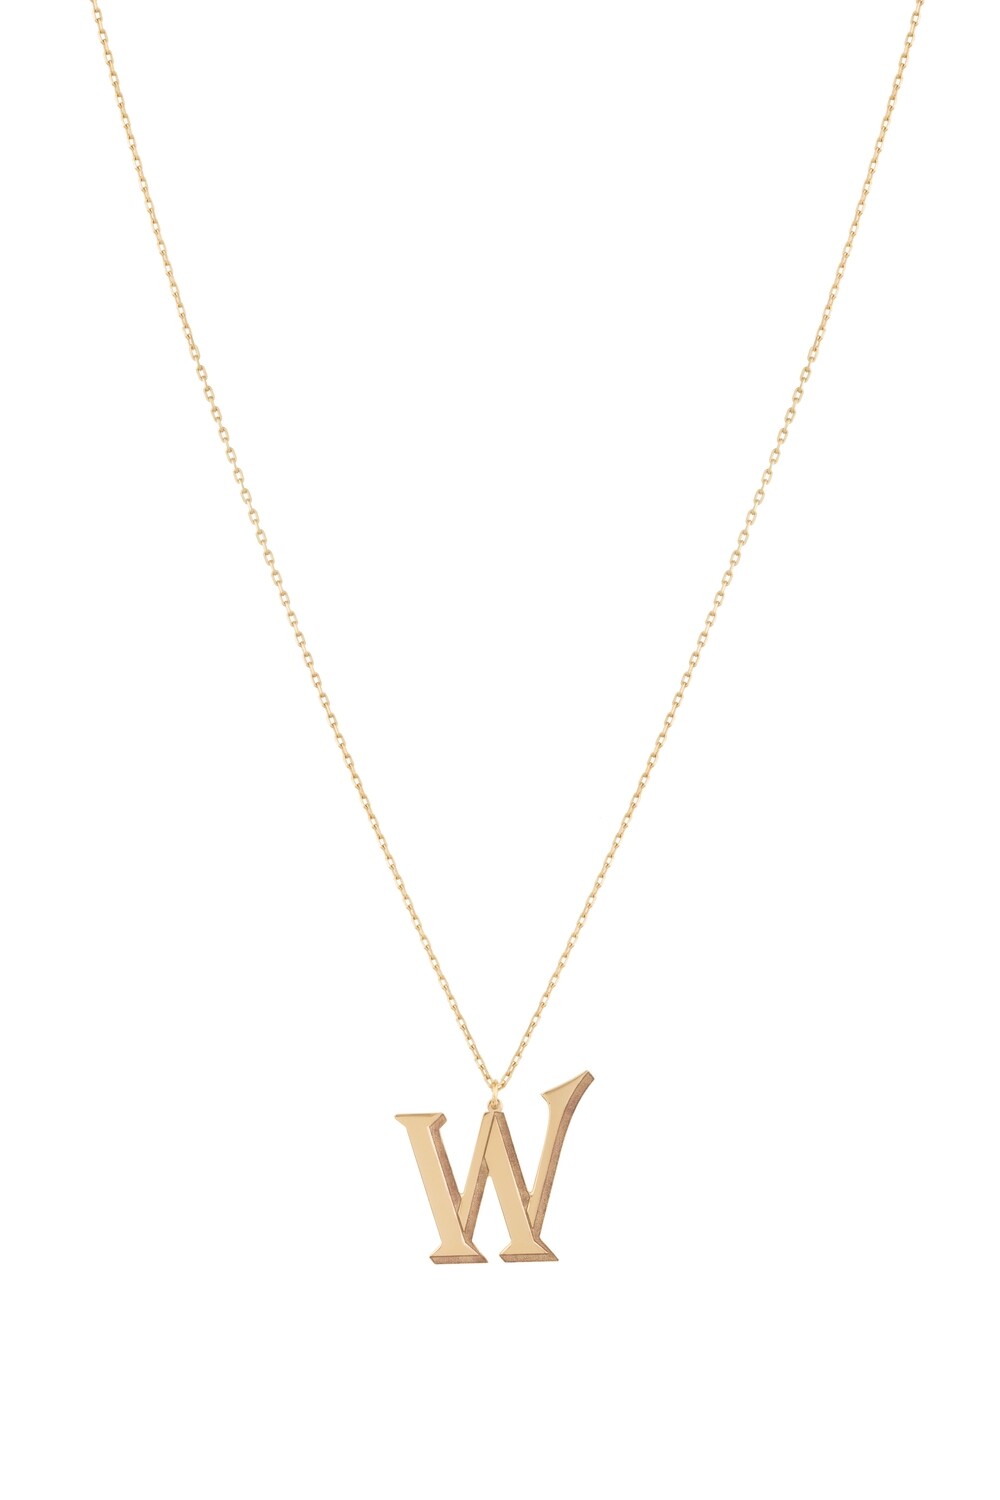 Initials Gold Necklace Letter W